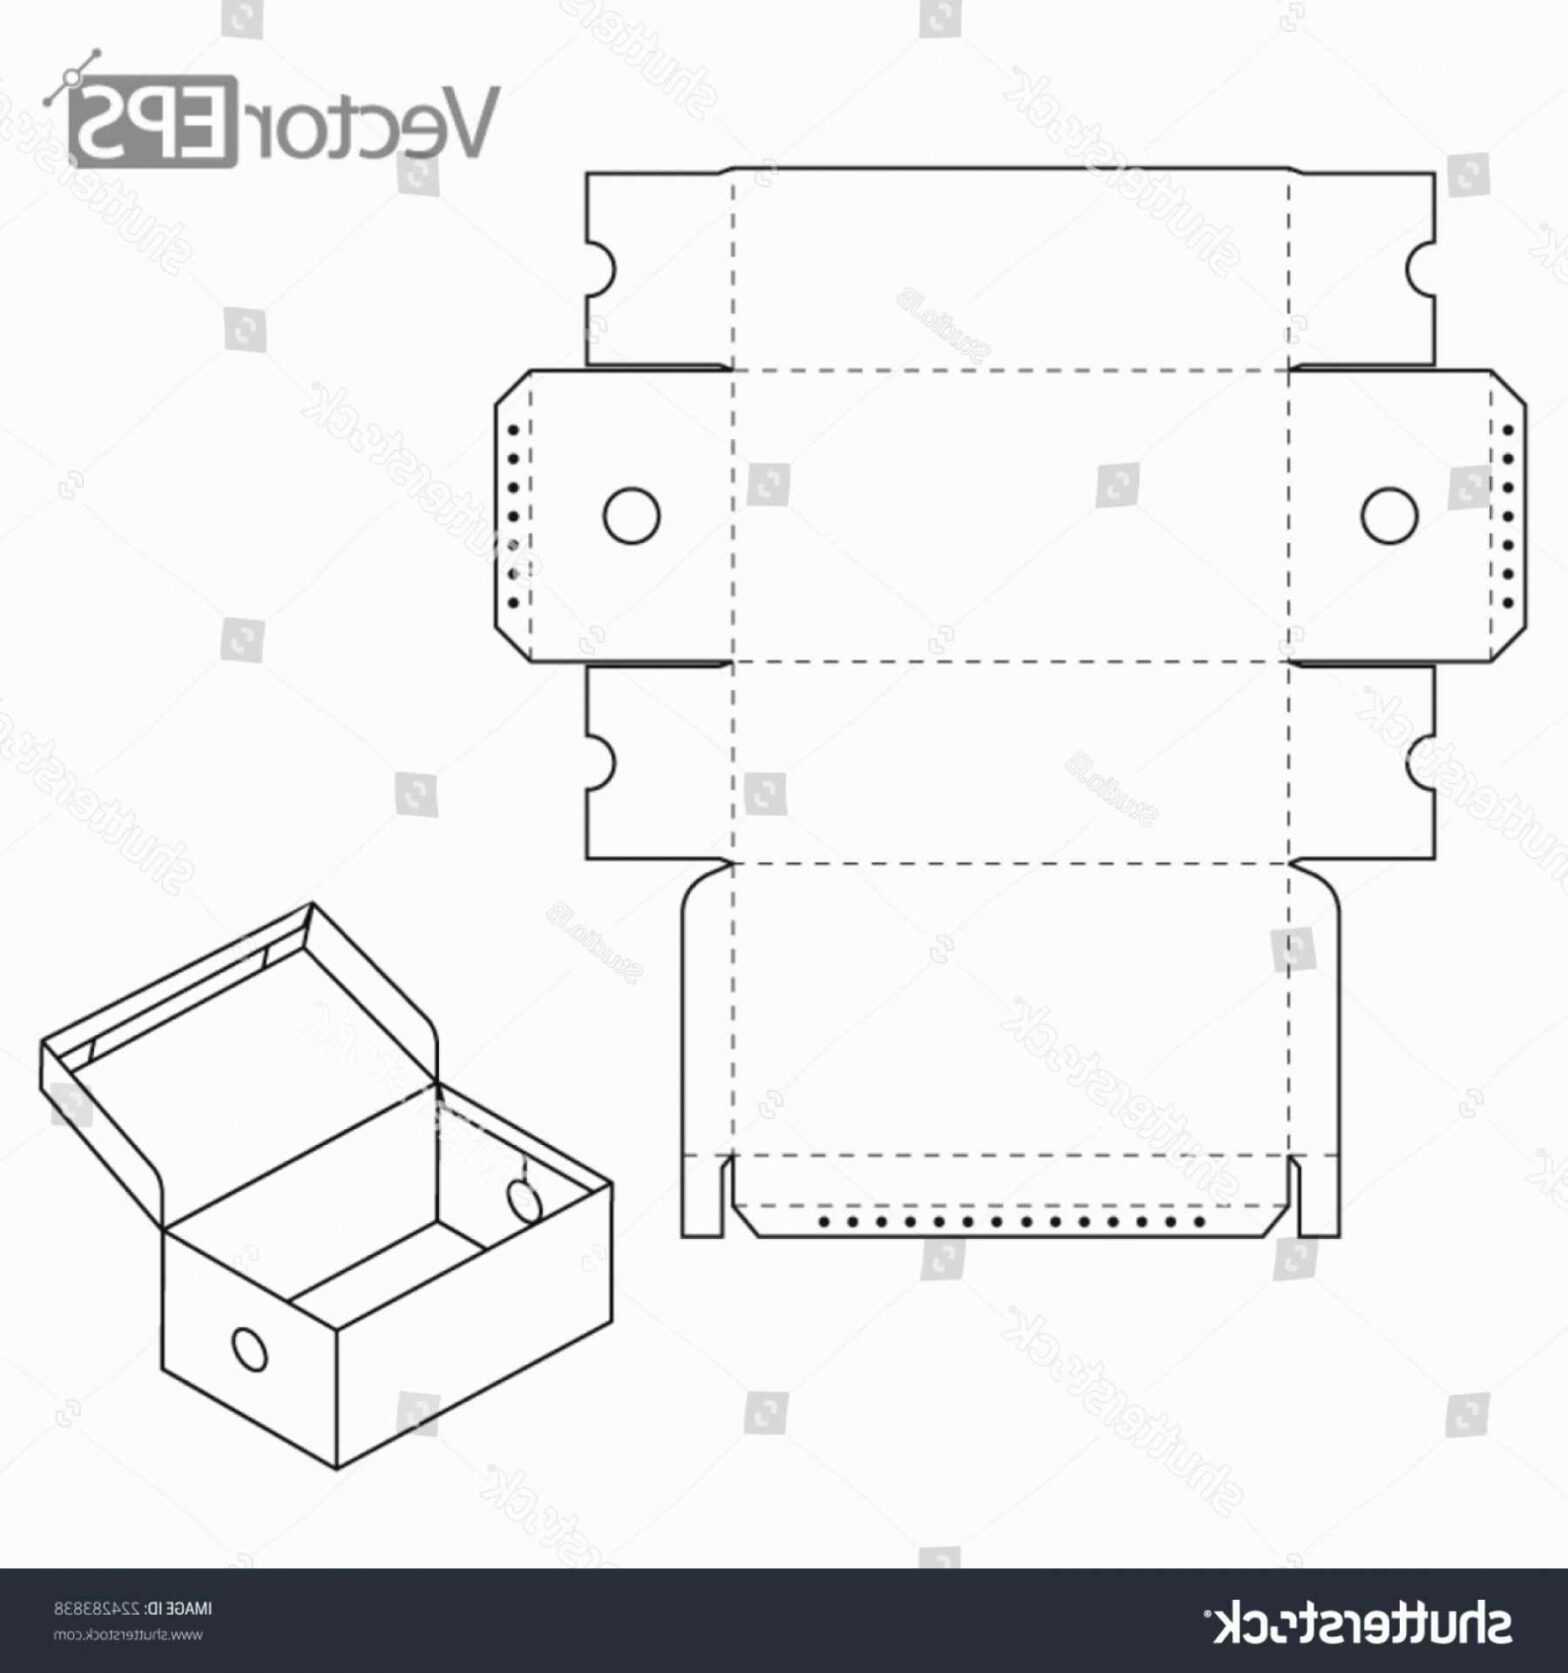 39 Card Box Template Generator Now With Card Box Template inside Card Box Template Generator